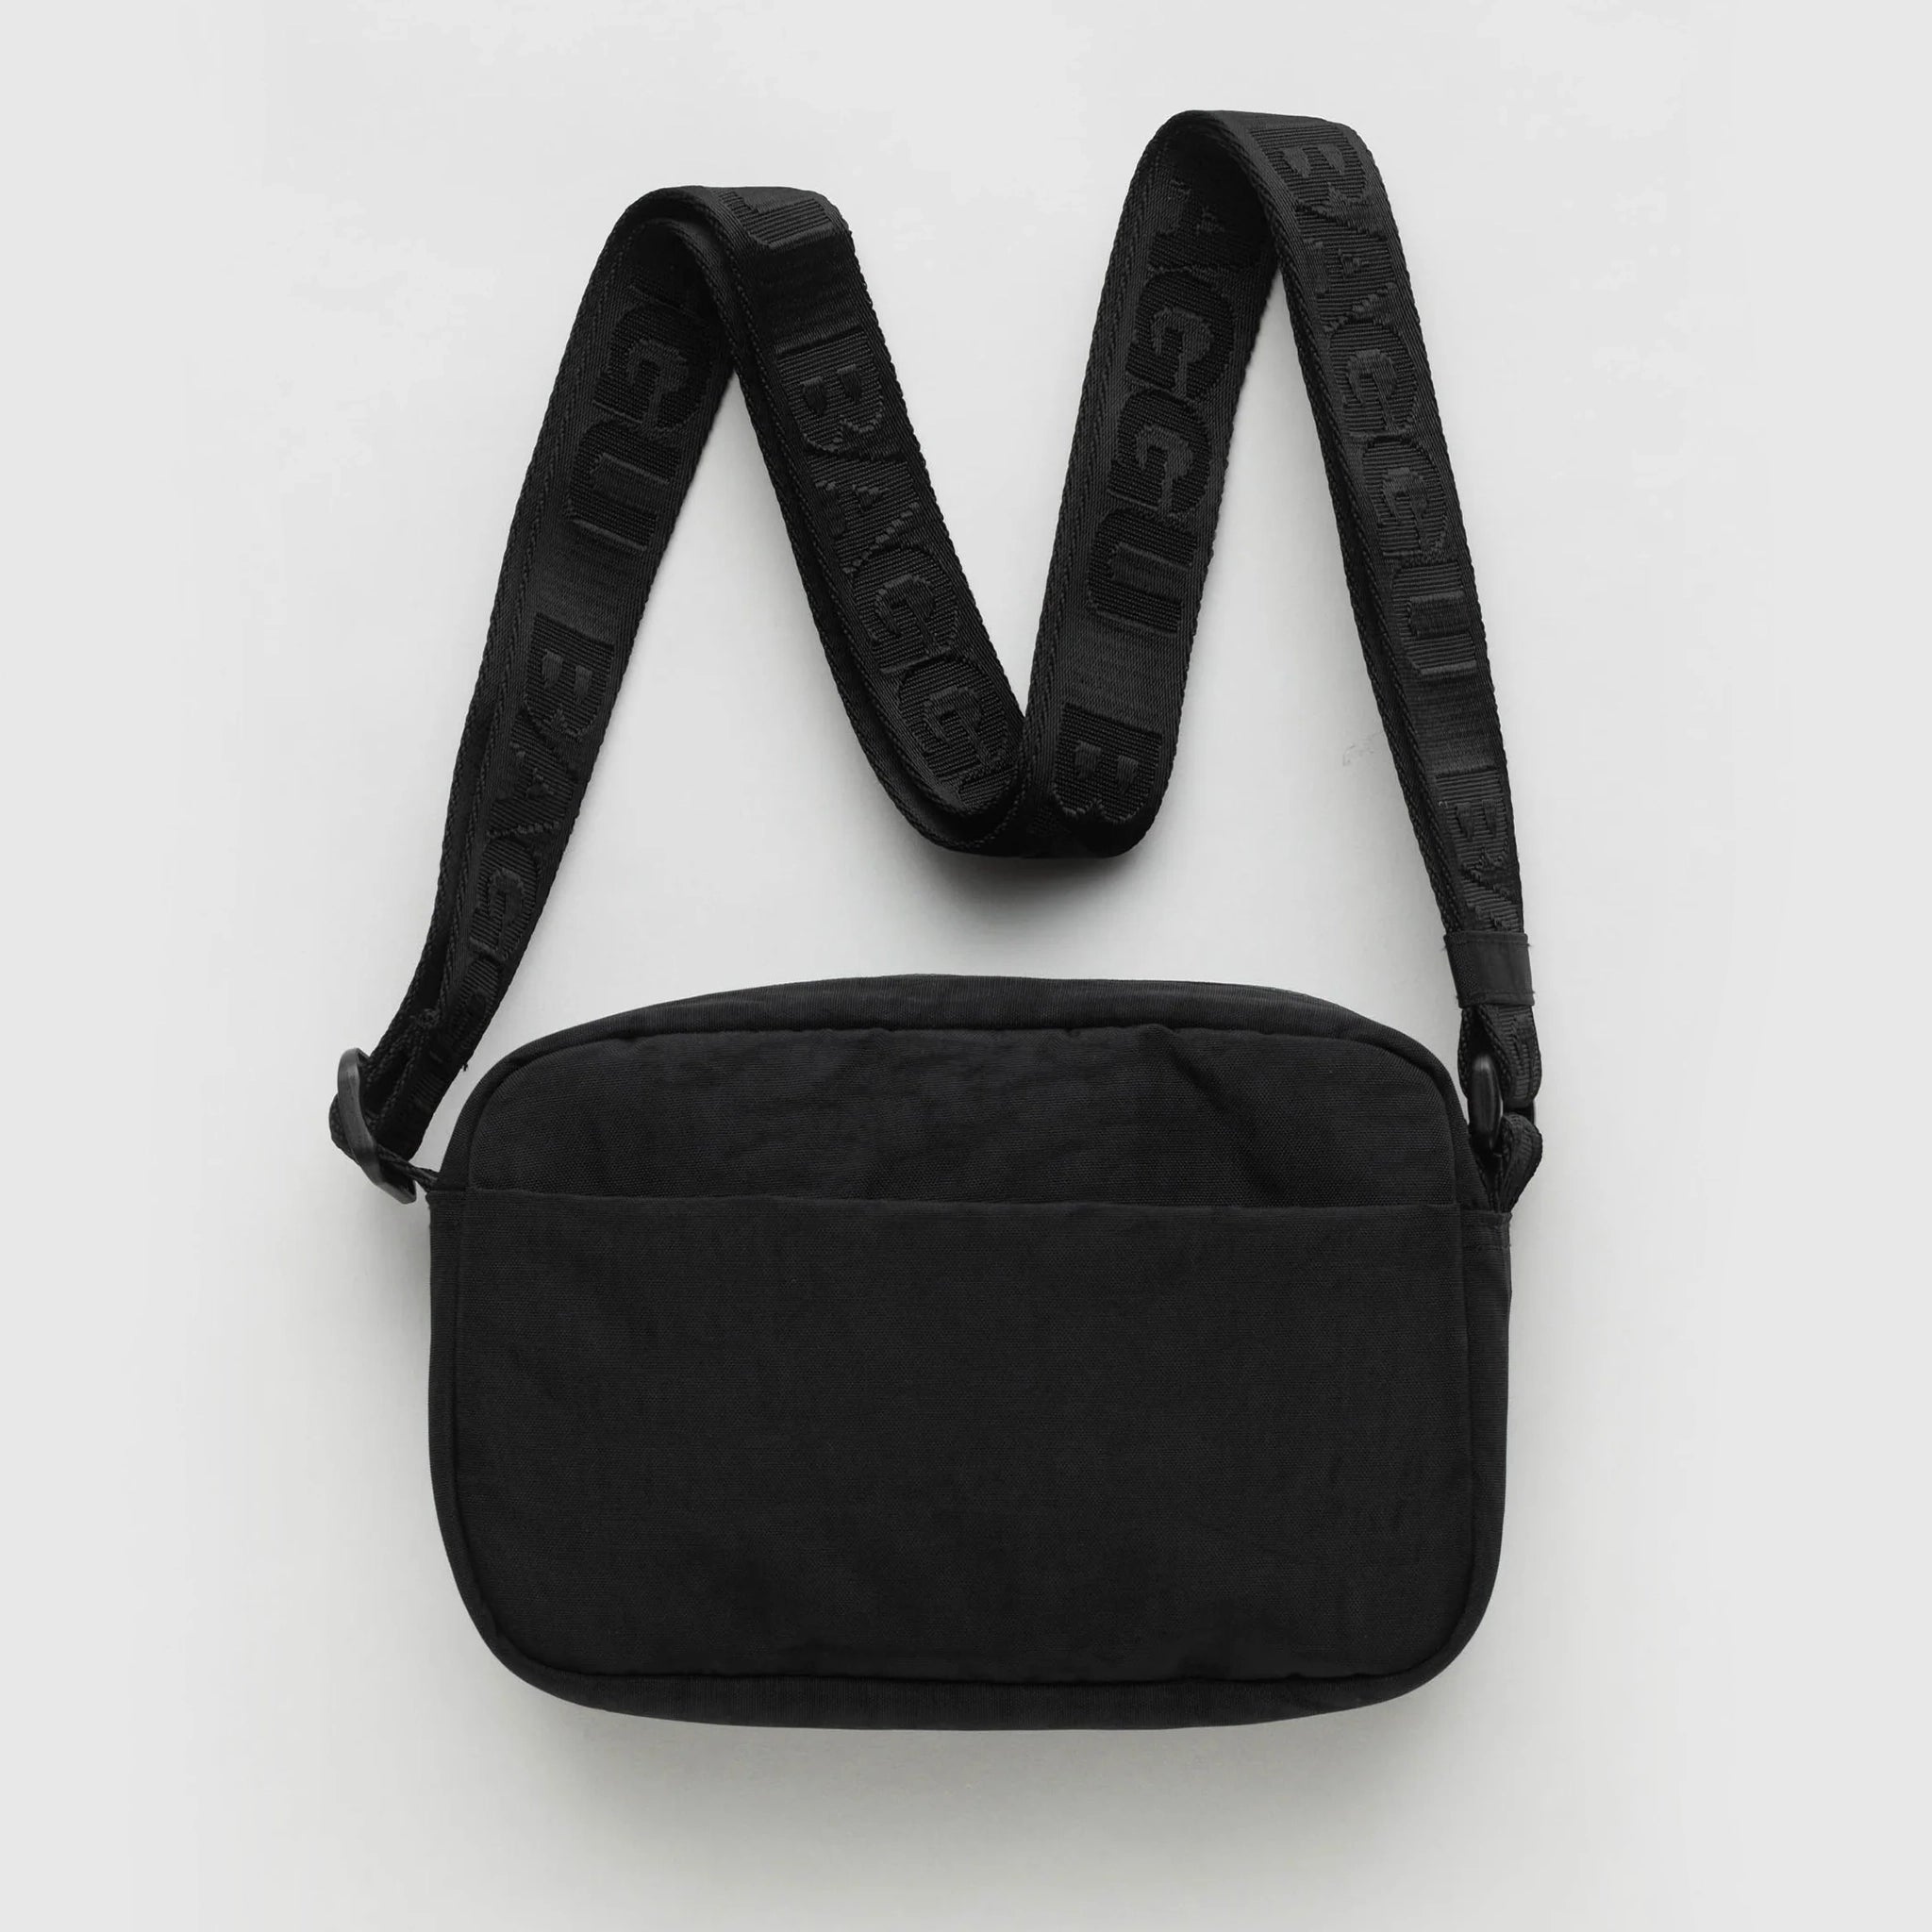 On a light grey background is a black crossbody made of sturdy nylon material with a black adjustable strap that has "BAGGU" stitched into it in a shinier black material.